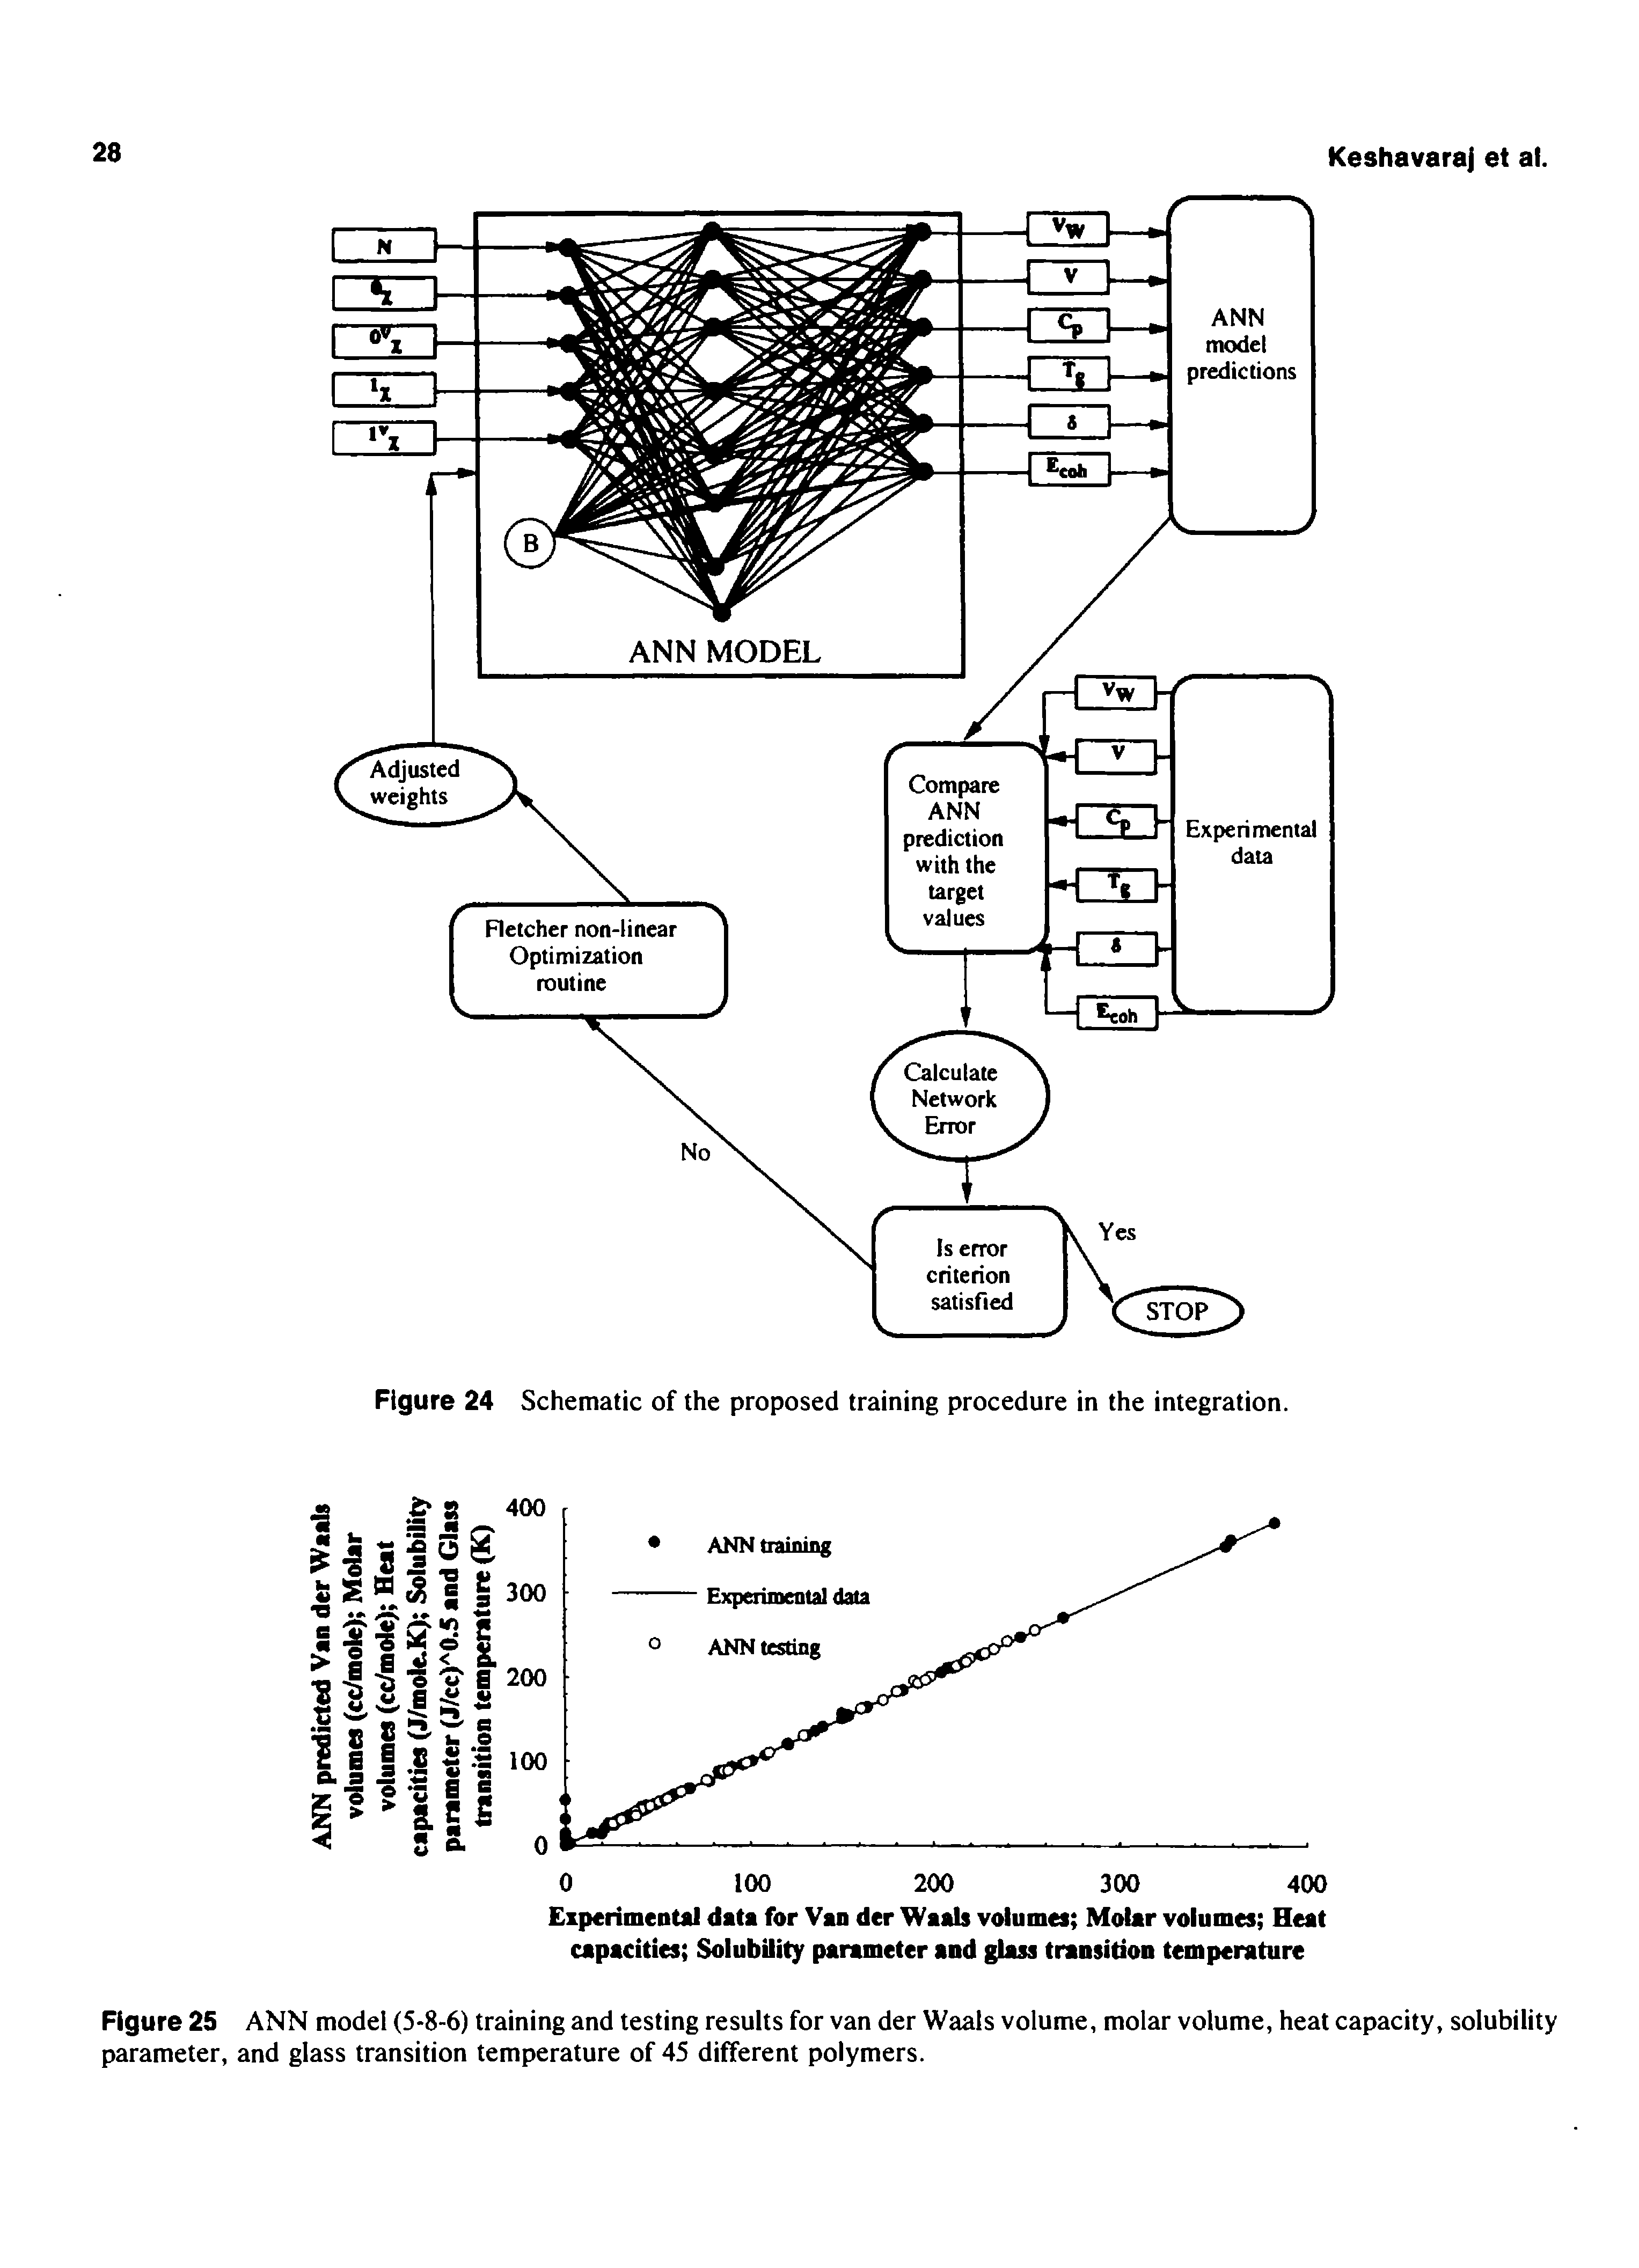 Figure 24 Schematic of the proposed training procedure in the integration.